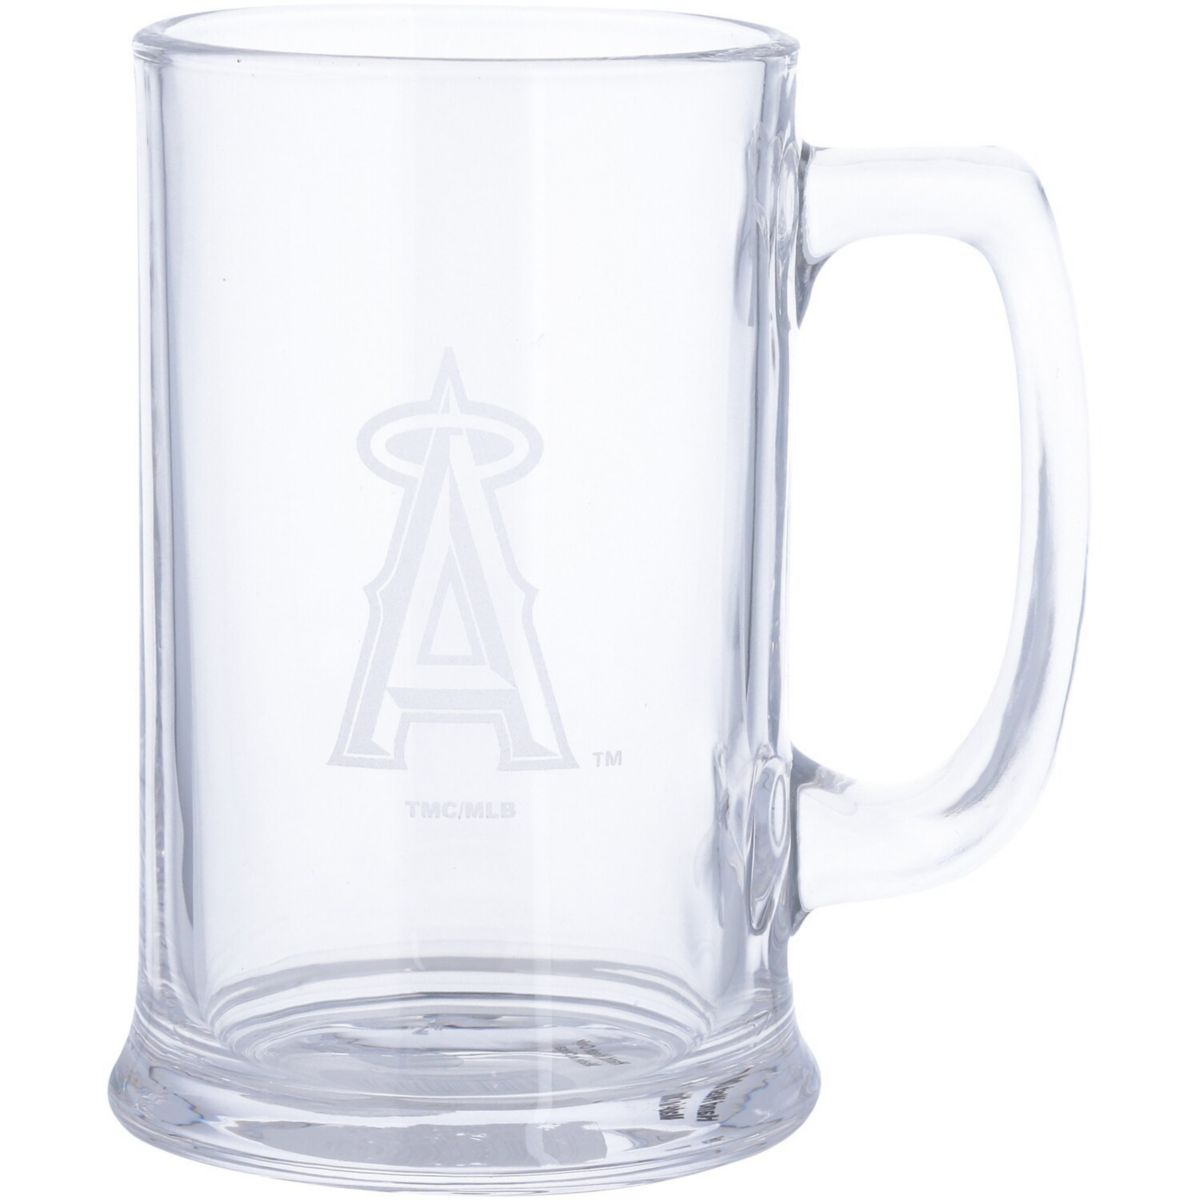 Los Angeles Angels 15oz. Stein Glass Unbranded